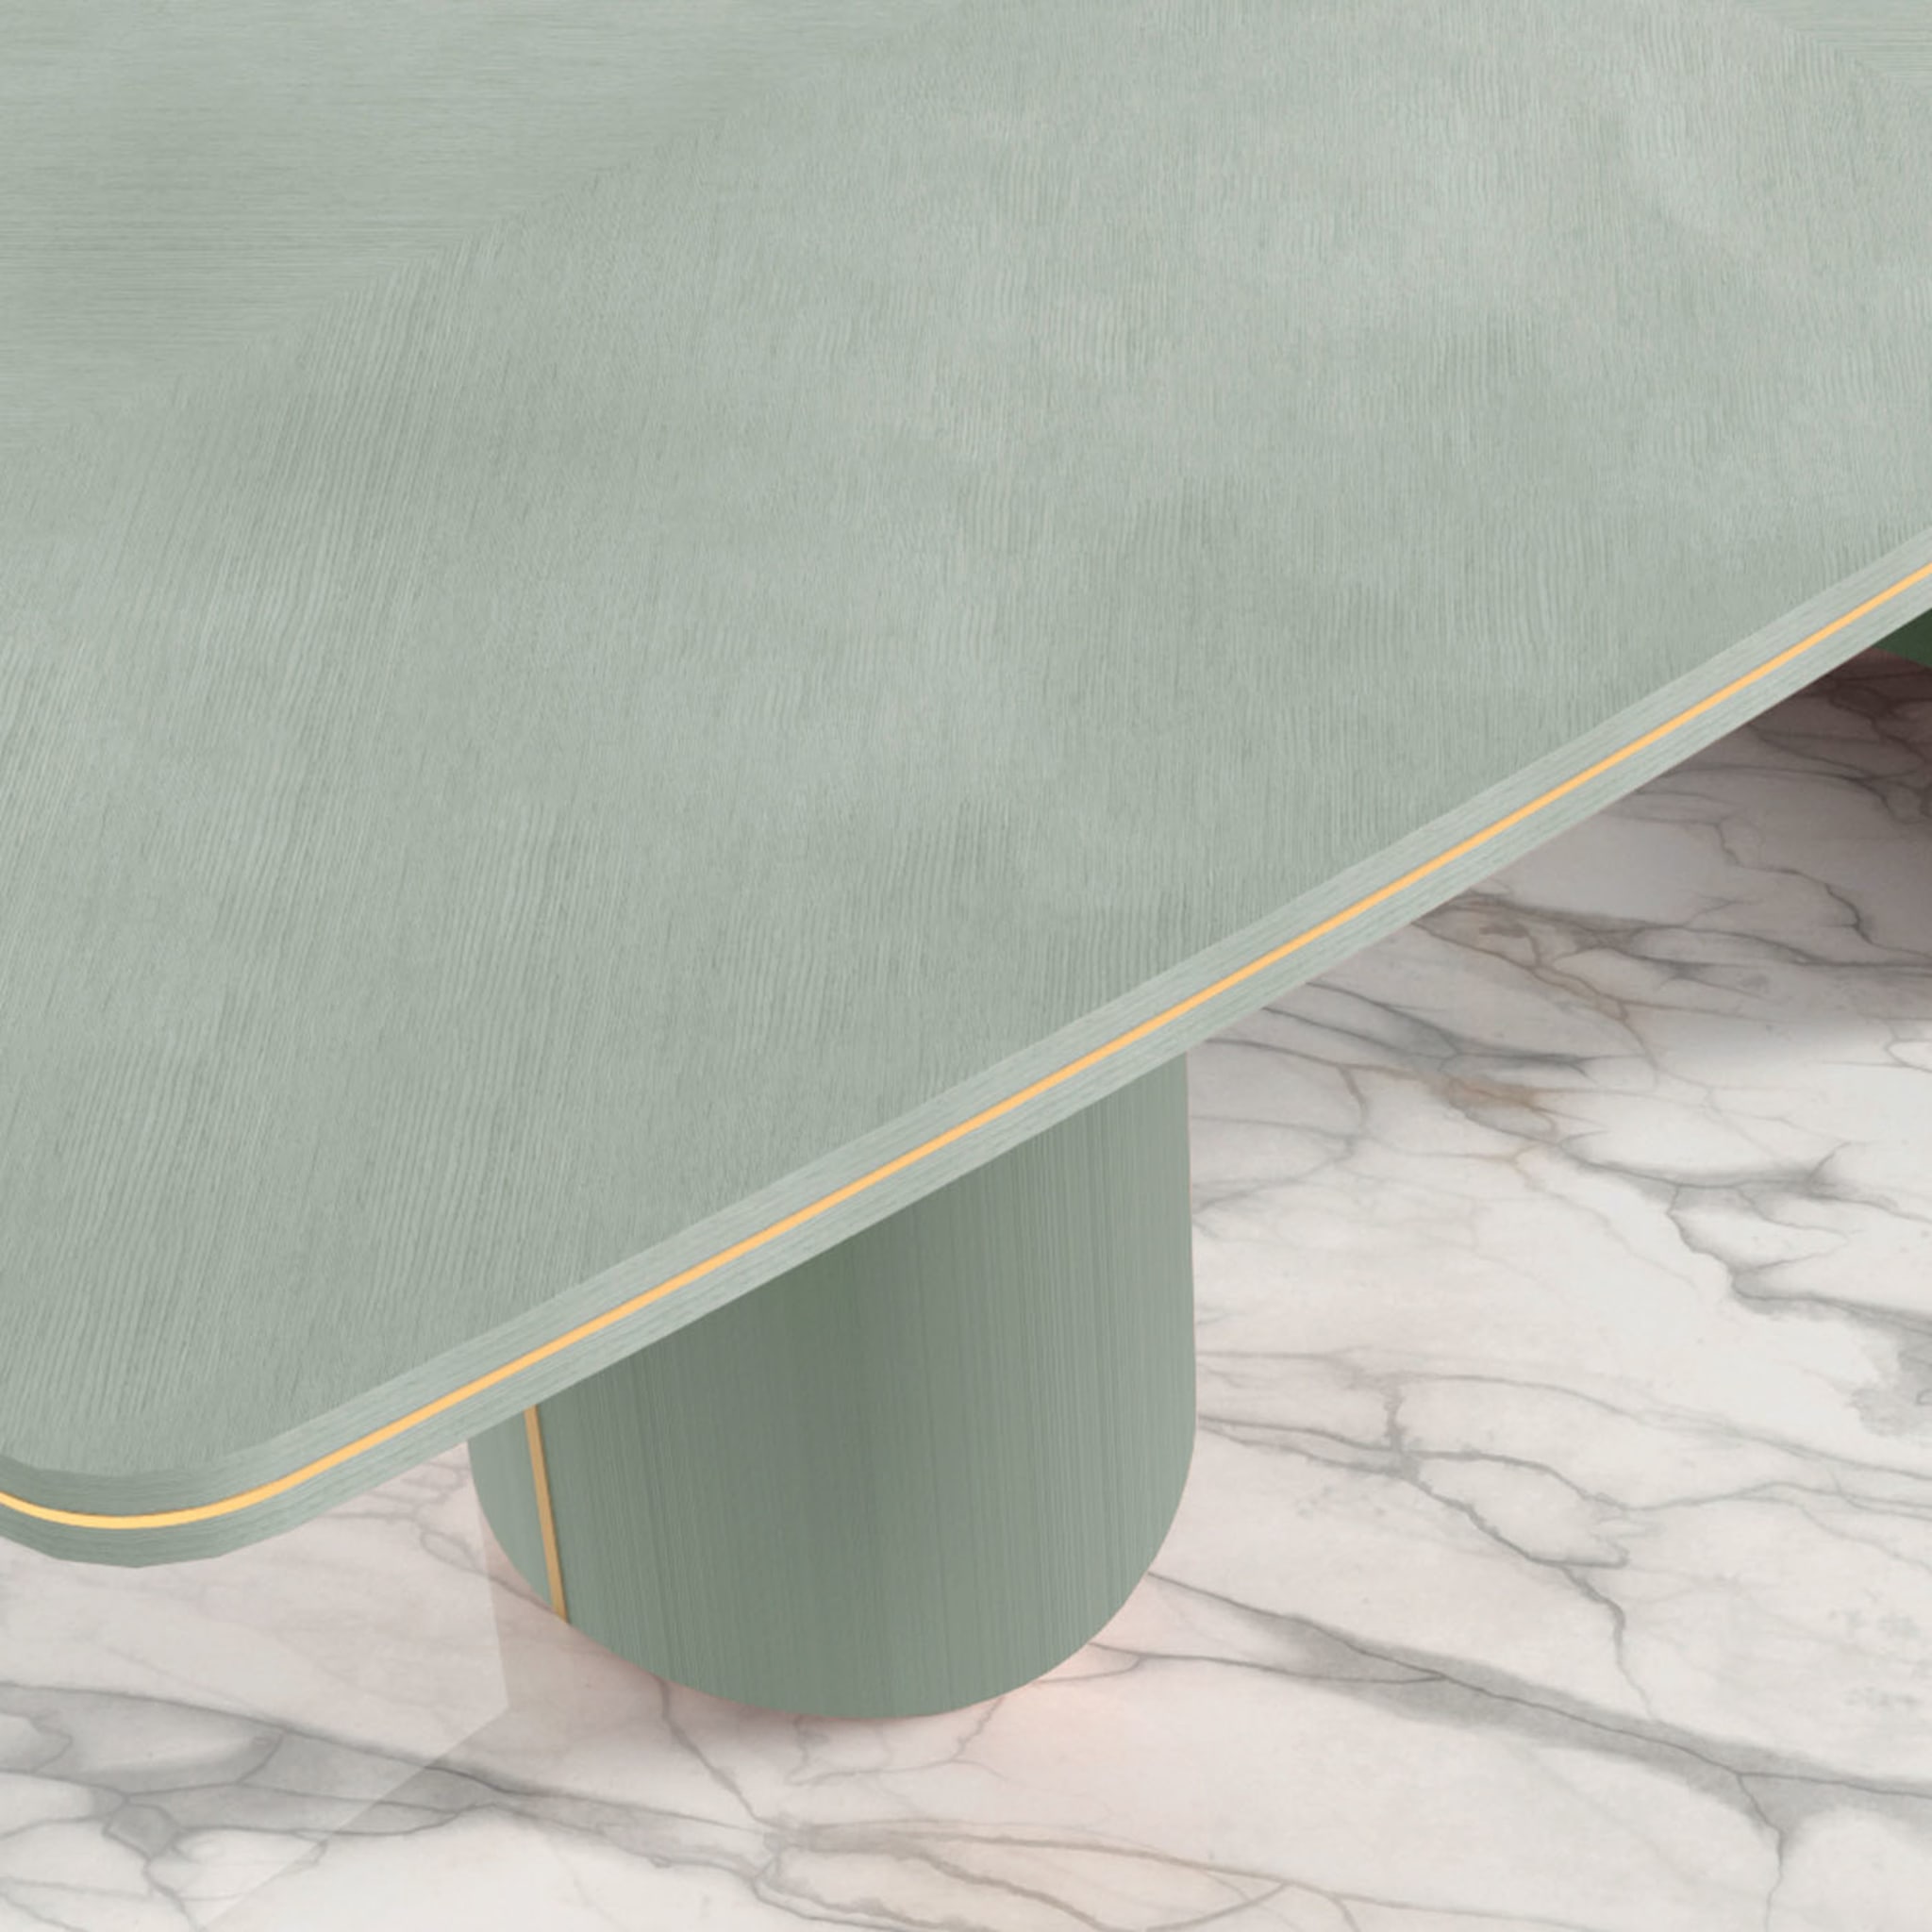 Edo Extendable Sage-Green Dining Table  - Alternative view 4